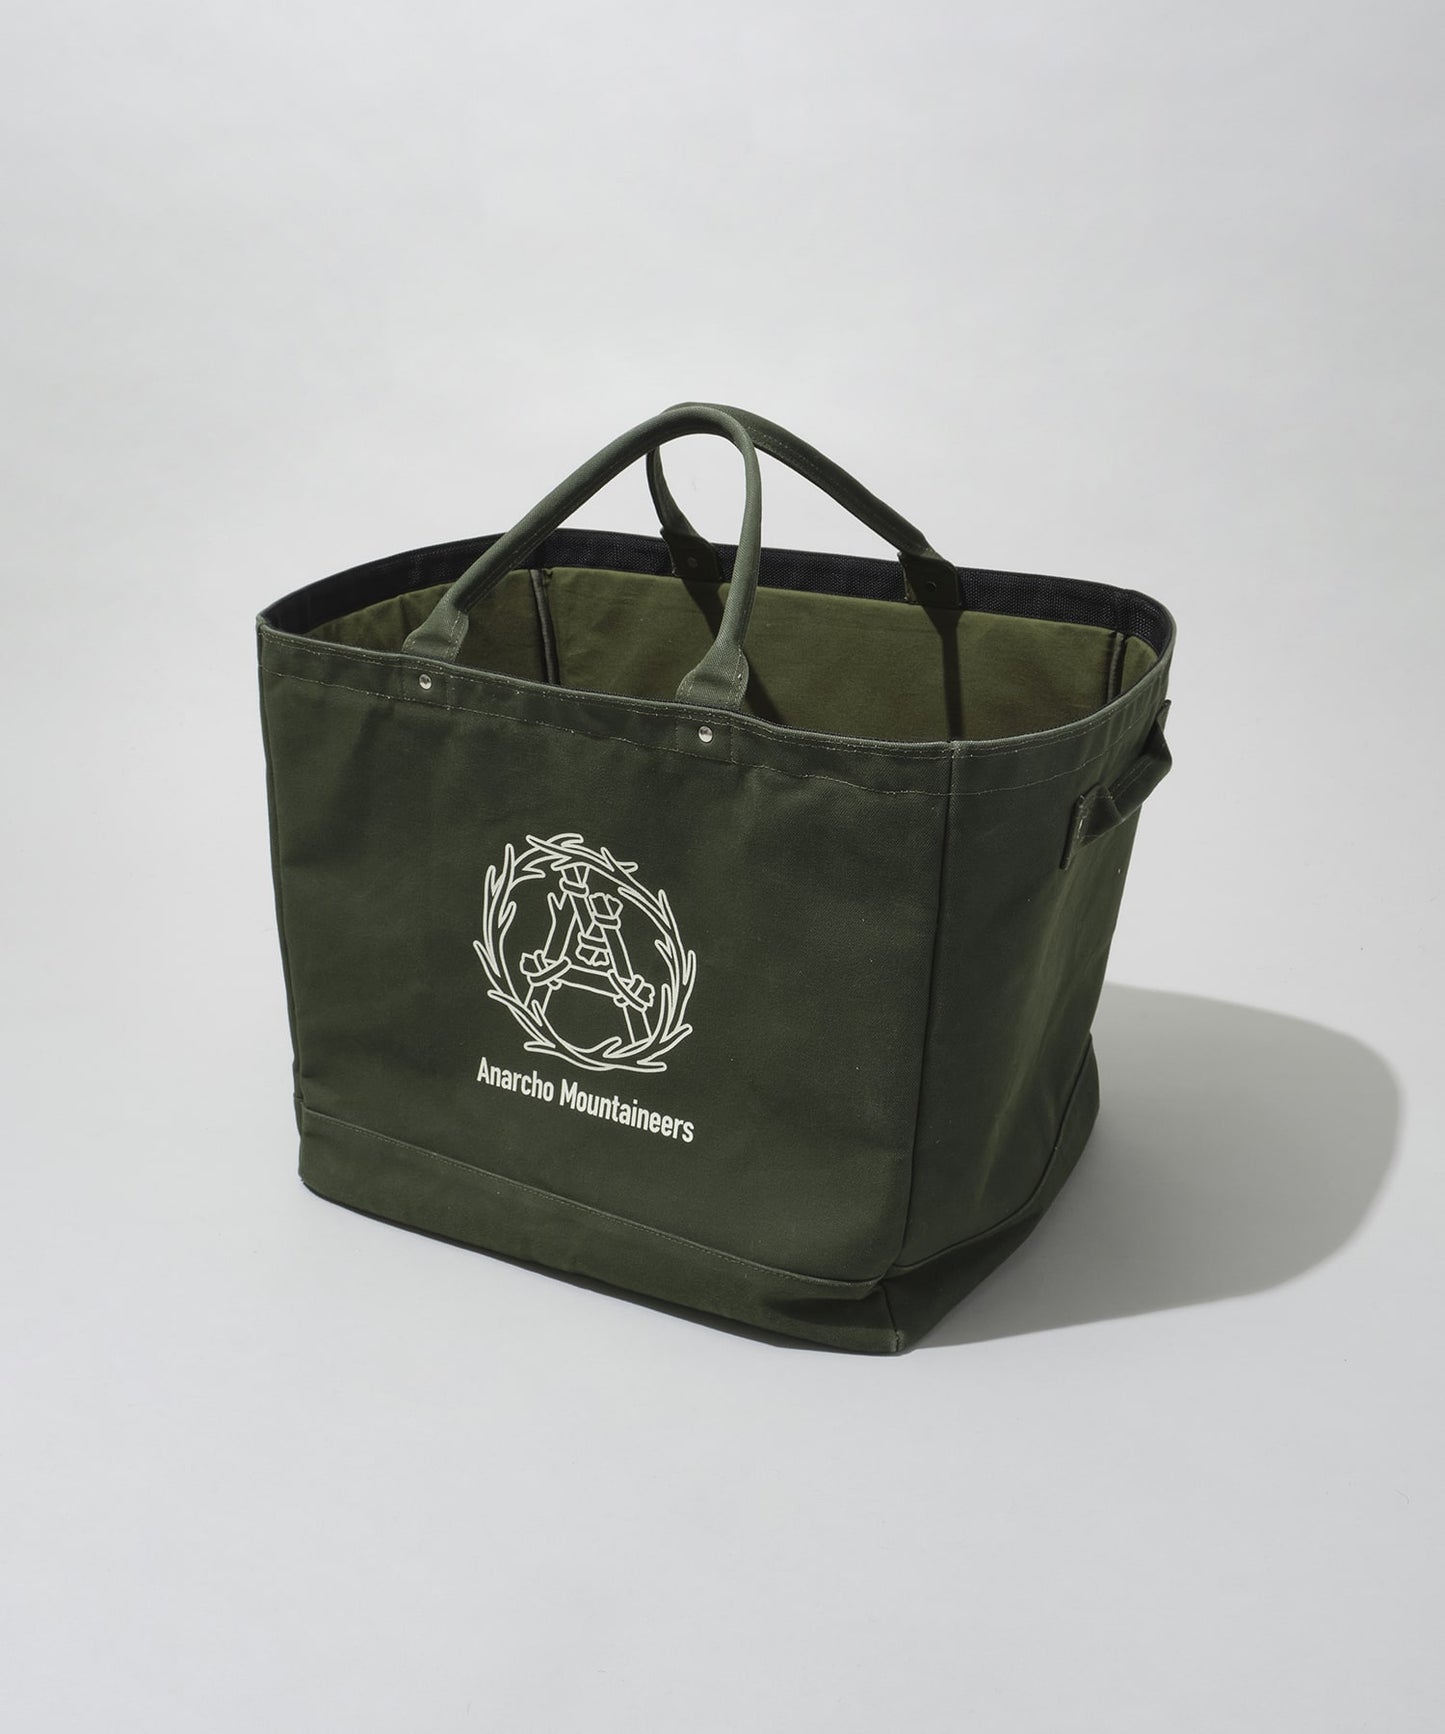 Mother Tote